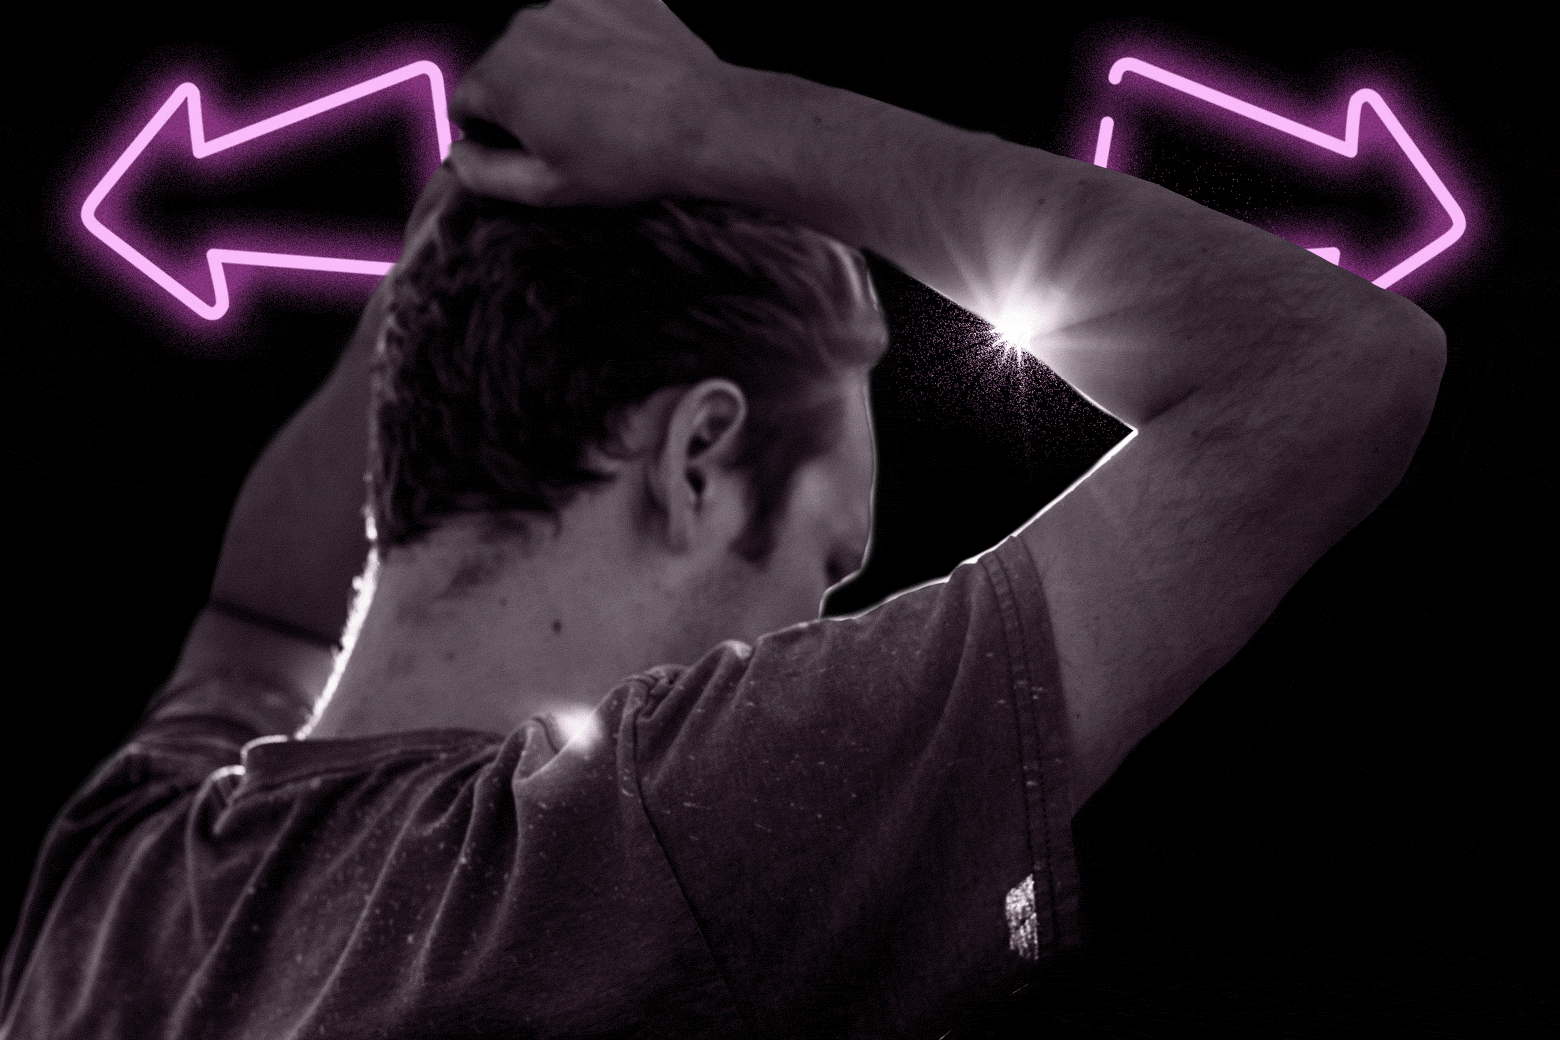 Photo illustration of a man frustratingly rubbing his head. Neon arrows pointing left and right, like a turn signal, glow in the background.